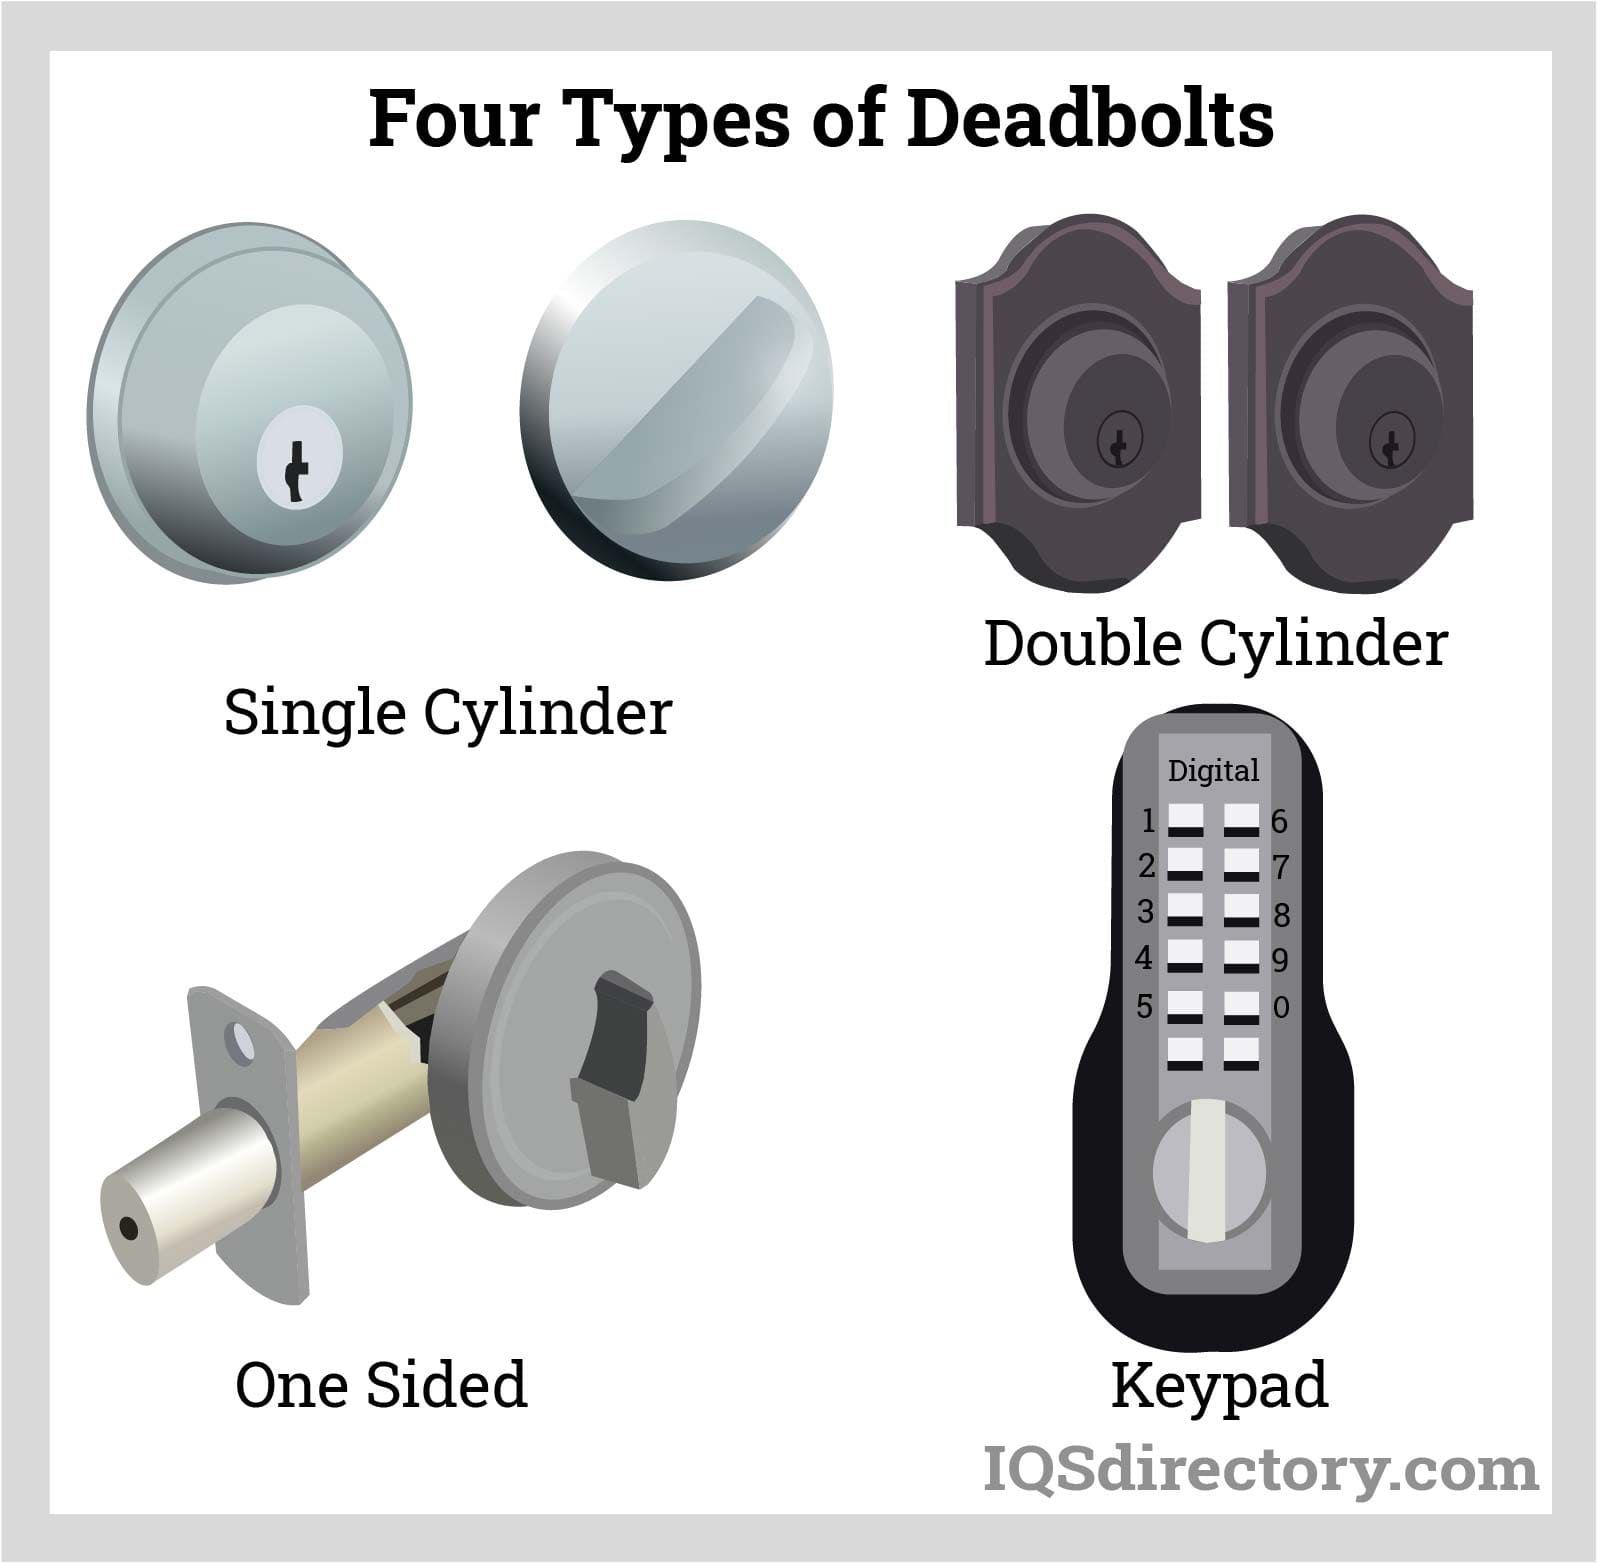 Refrigerator Locks Manufacturers and Suppliers in the USA